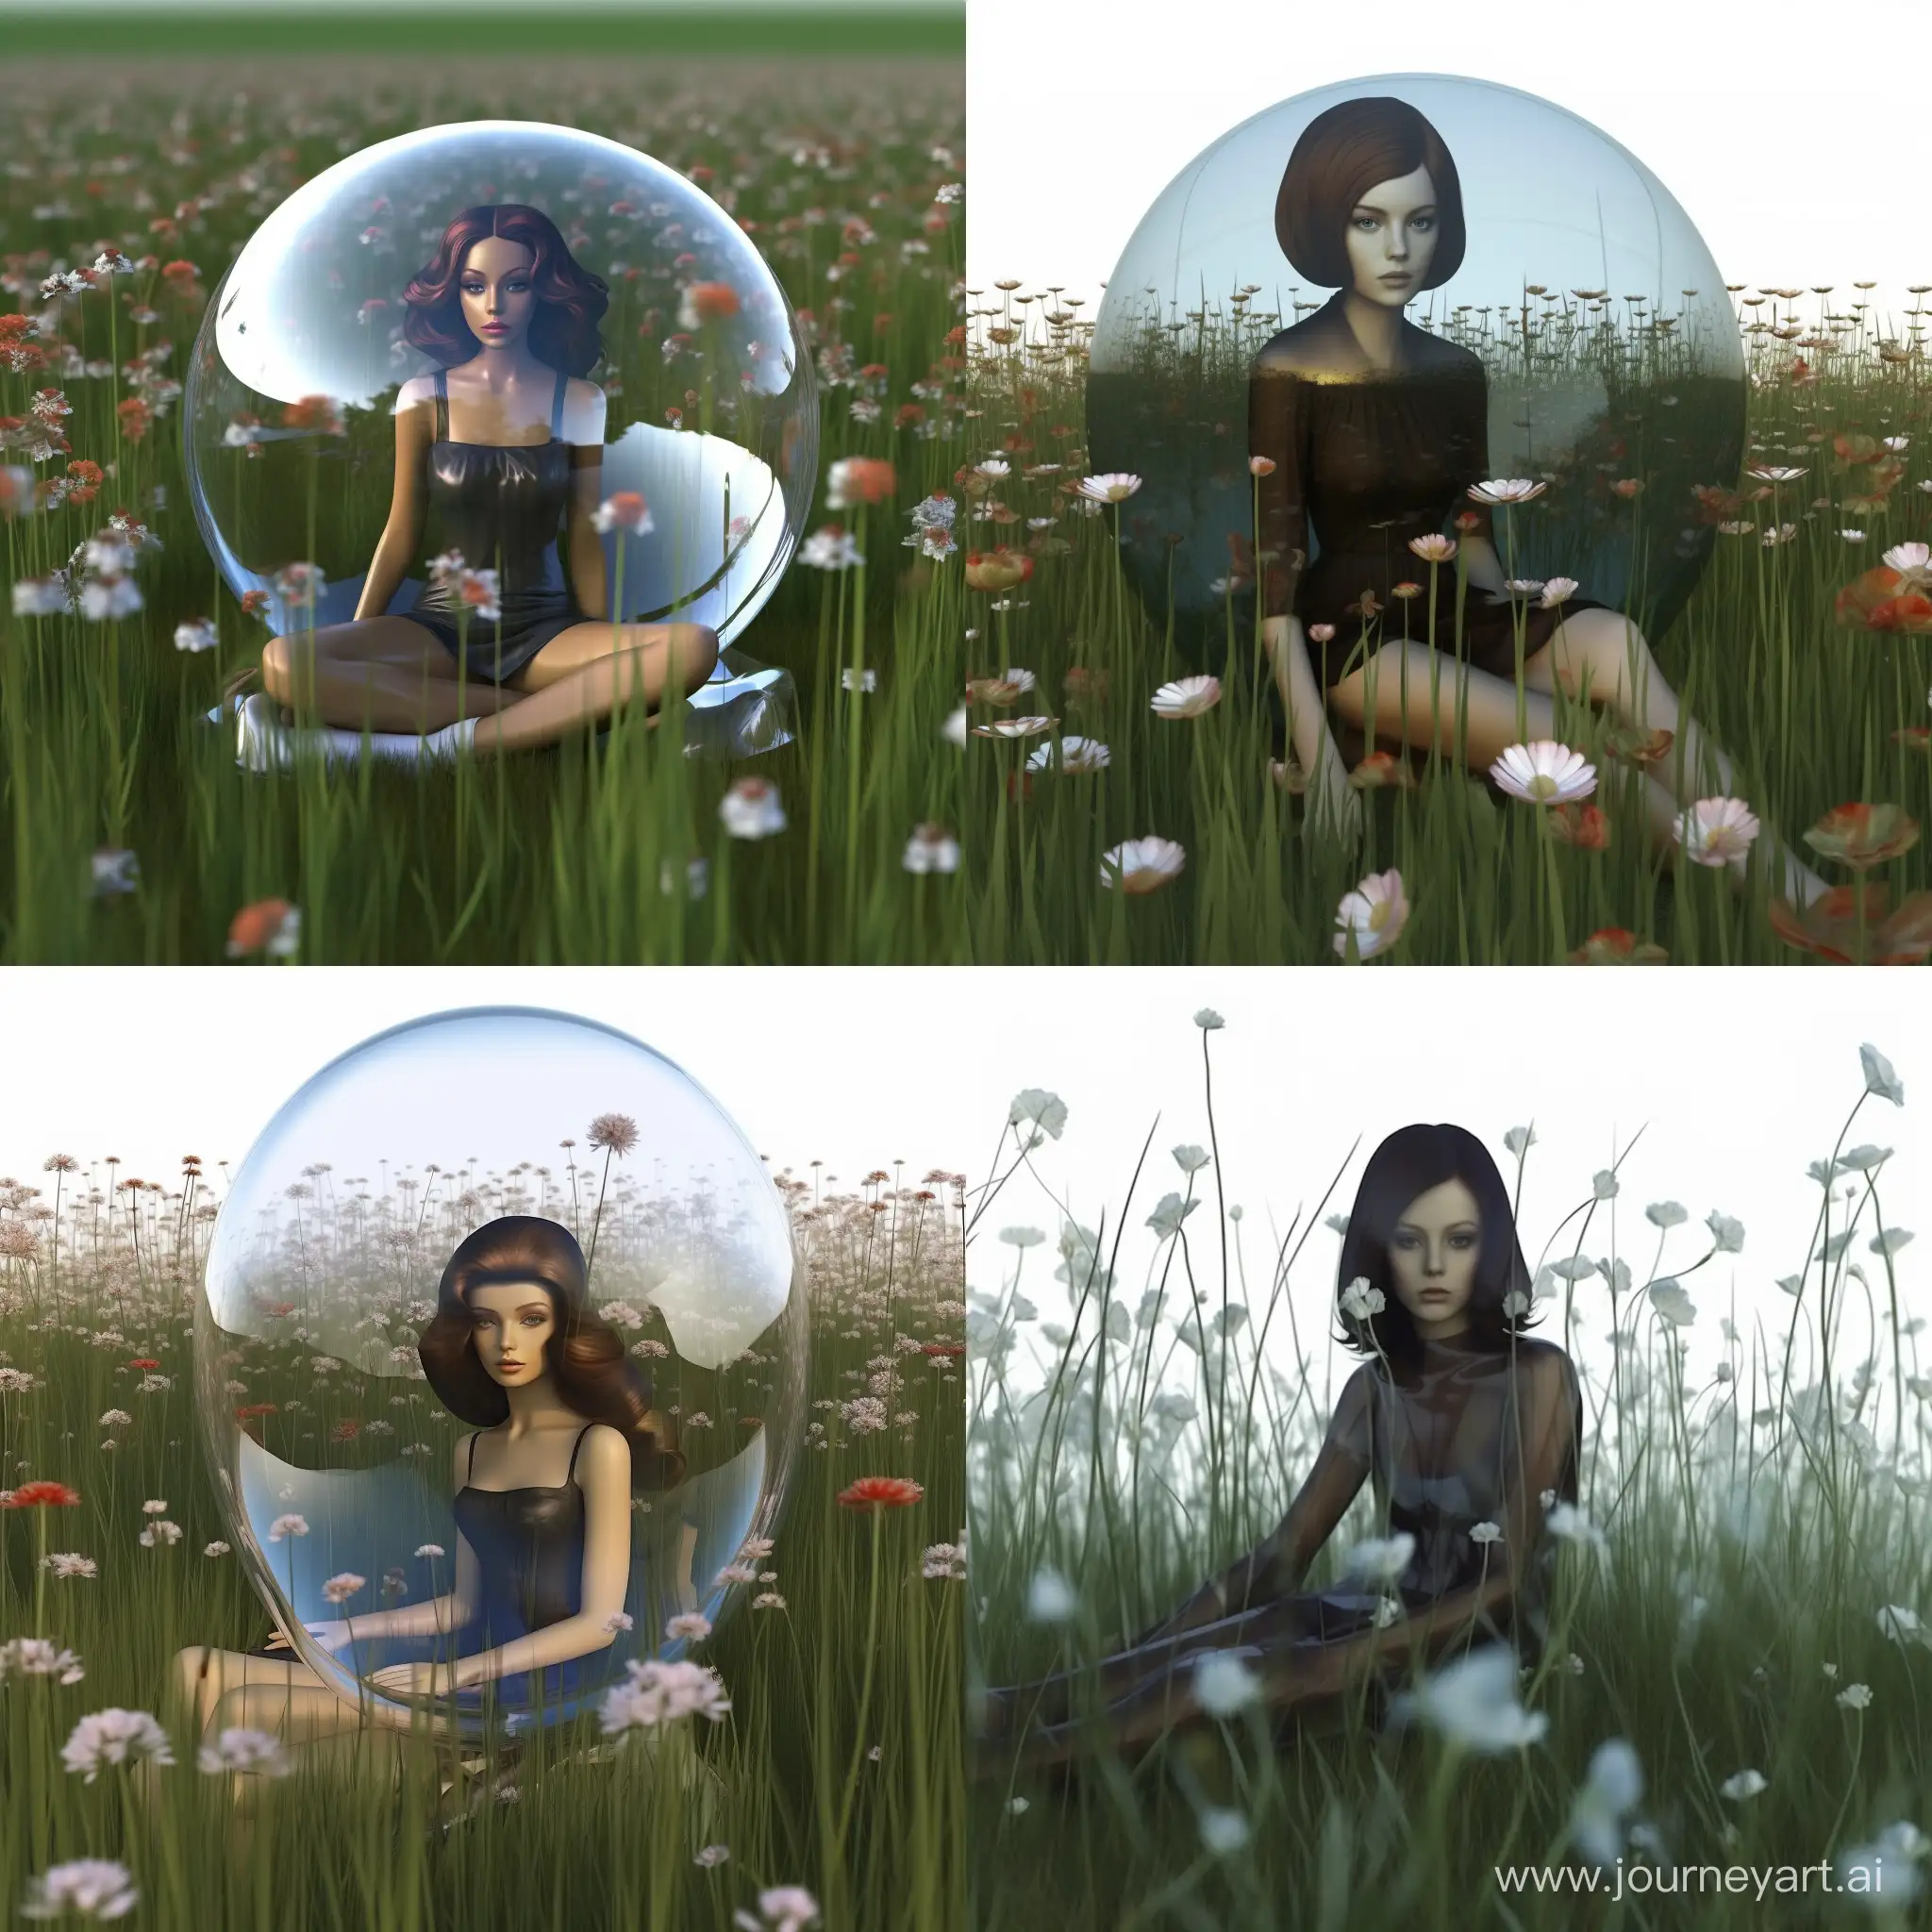 Ethereal-Beauty-Graceful-Woman-Amidst-Blooming-3D-Flowers